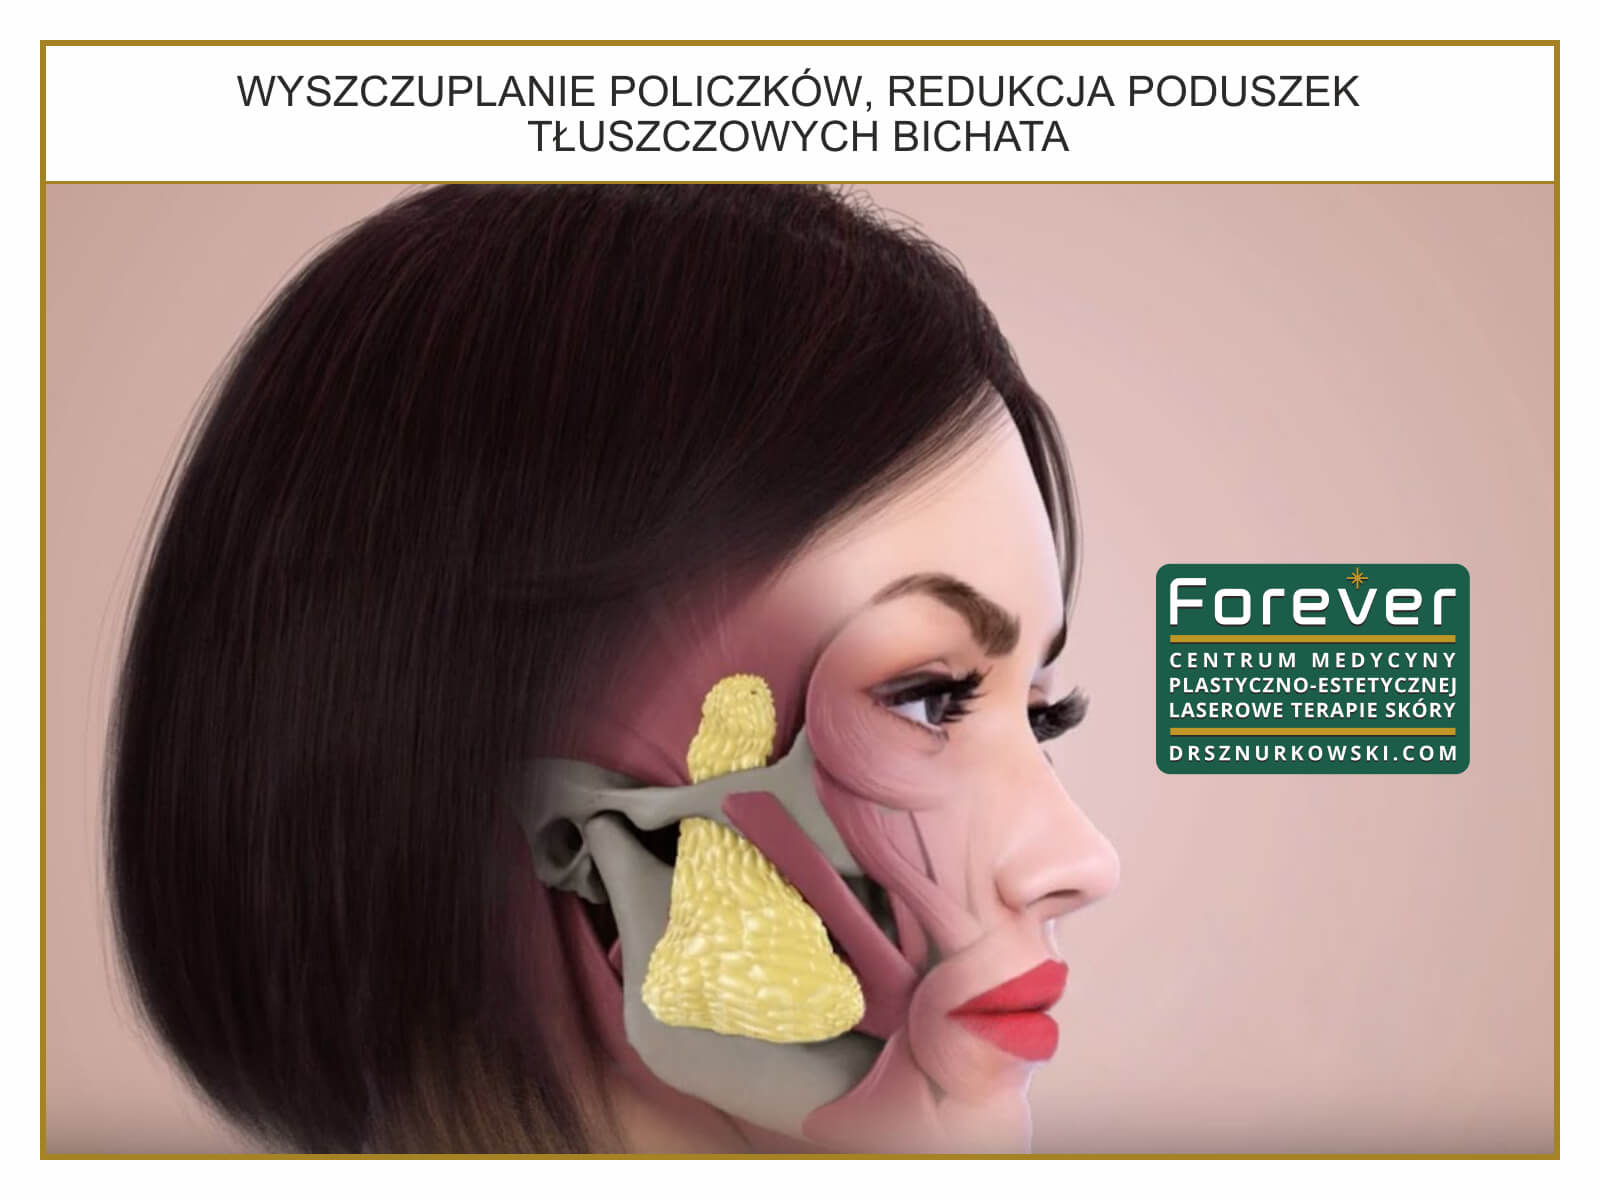 A Slimmer Face, More Visible Bones Cheek - Removal of Bichata...2 (80x60) PL.jpg